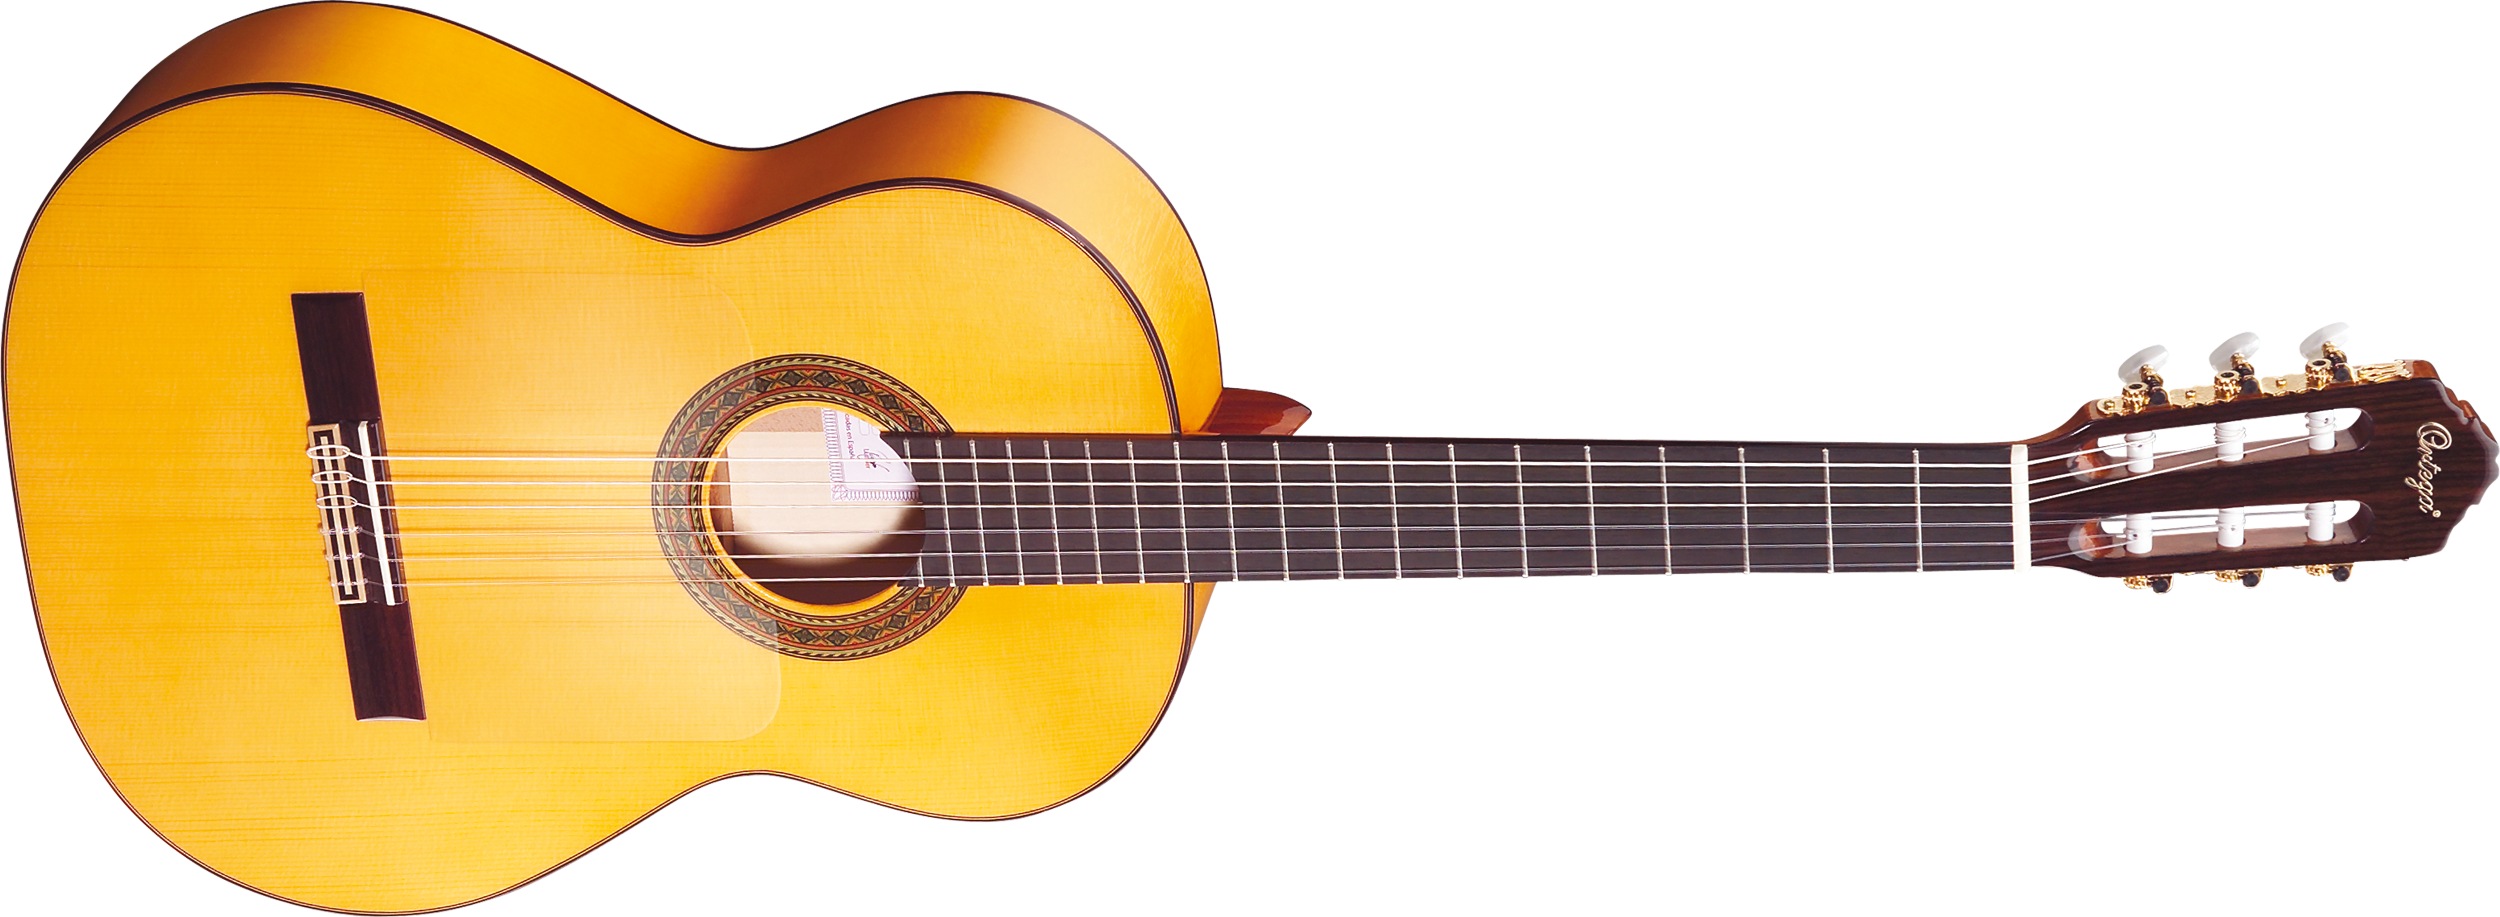 Guitar PNG images free picture download